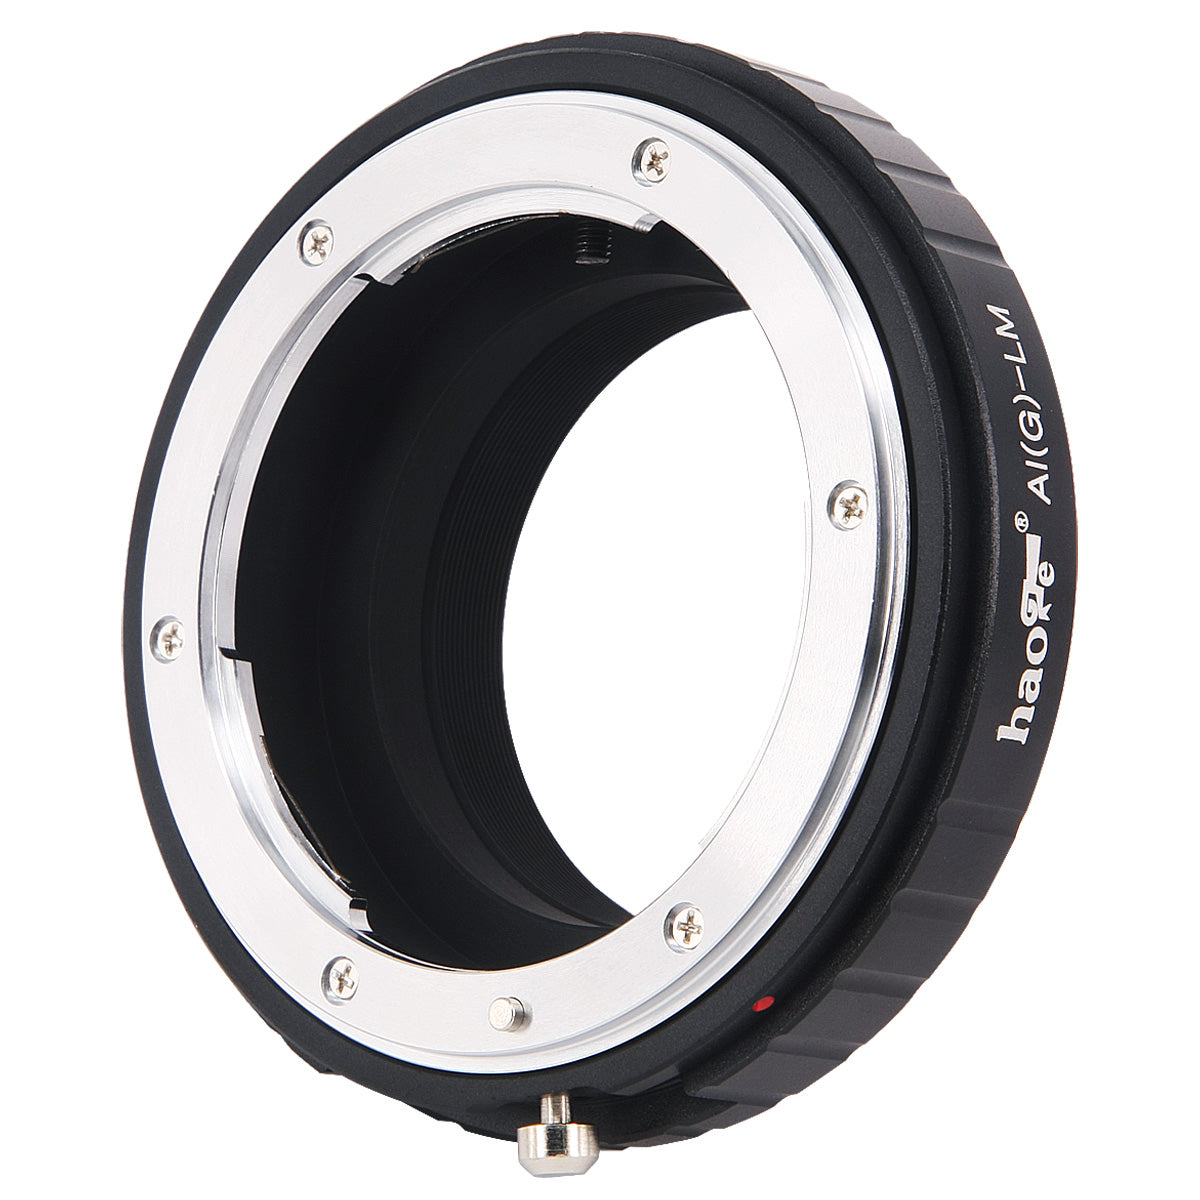 Haoge Lens Mount Adapter for Nikon Nikkor AI / AIS / G / D Lens to Leica M-mount Camera such as M240, M240P, M262, M3, M2, M1, M4, M5, CL, M6, MP, M7, M8, M9, M9-P, M Monochrom, M-E, M, M-P, M10, M-A